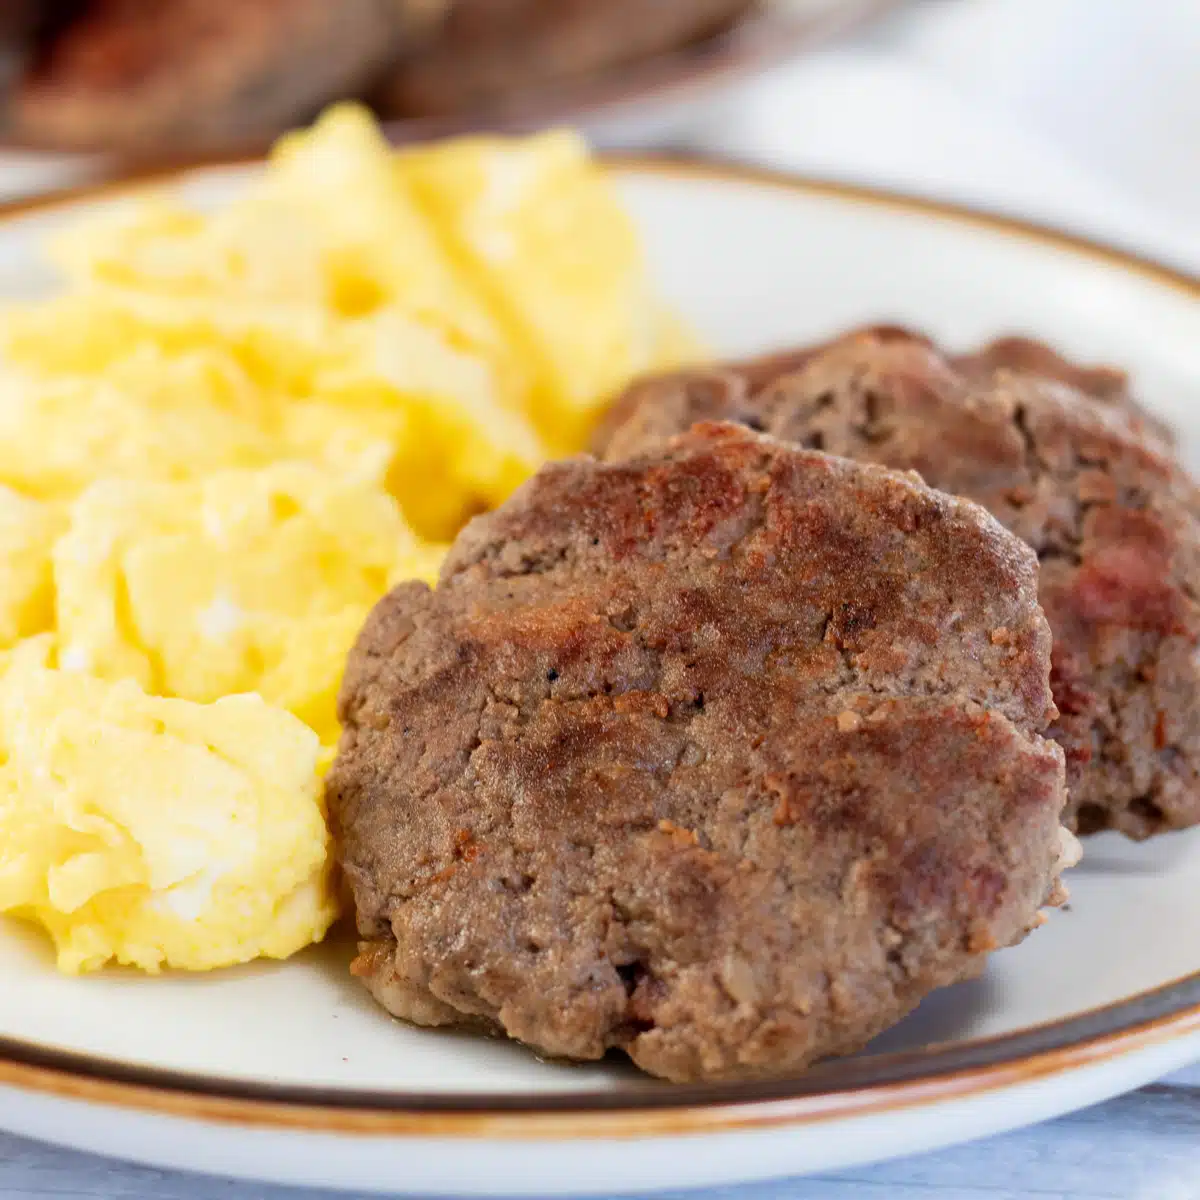 Square image showing breakfast sausage patties on a plate with scrambled eggs.